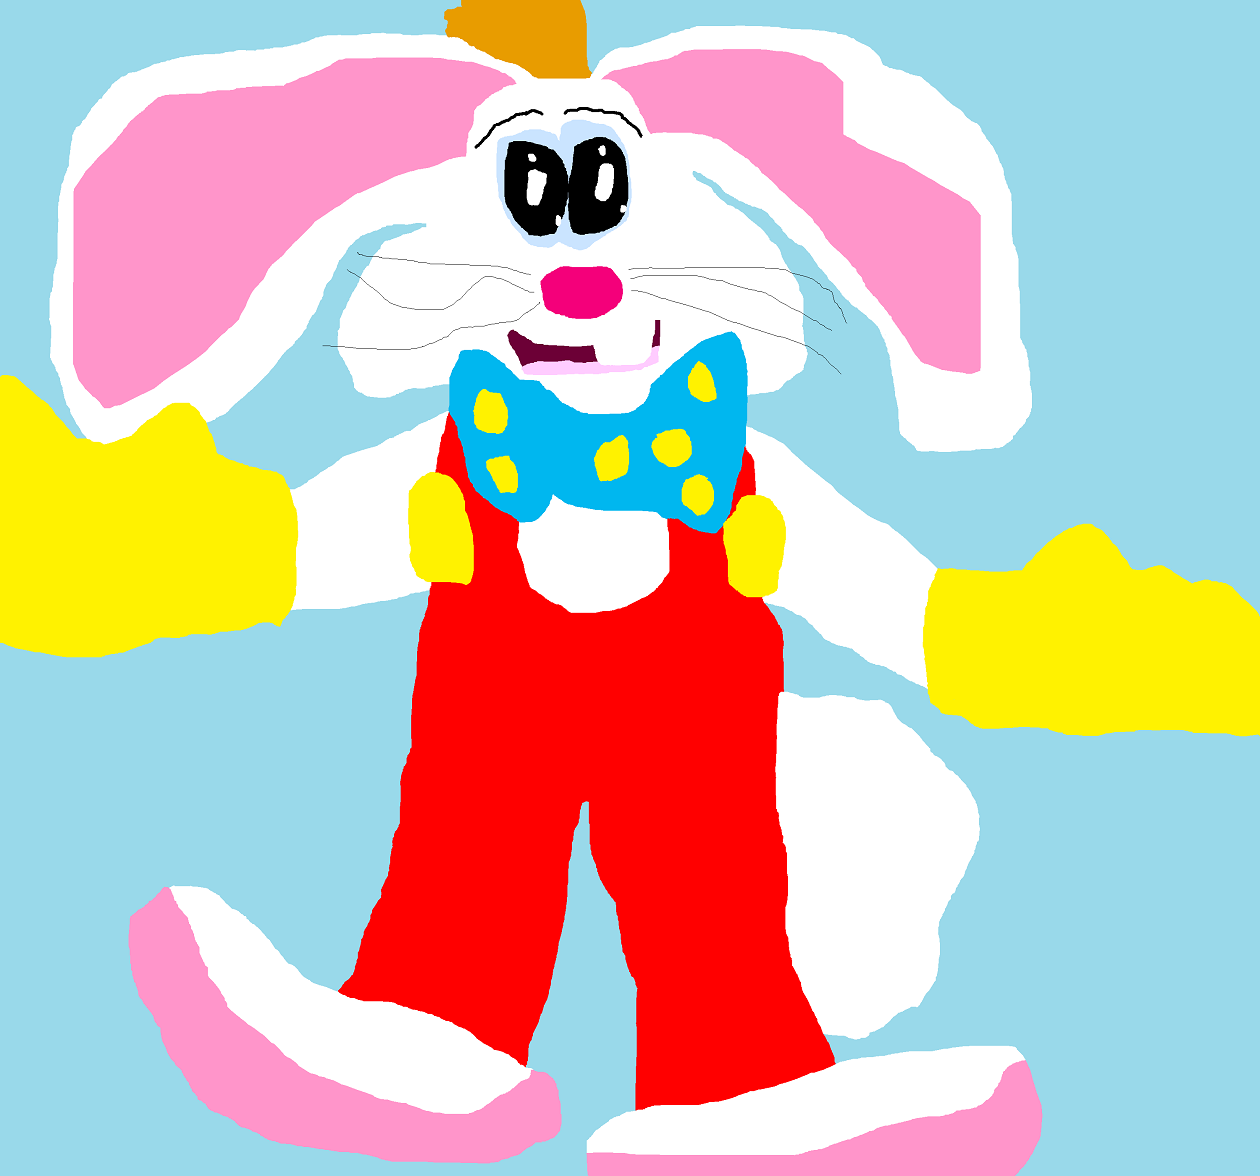 Roger Rabbit Ms Paint New For 2014 by Falconlobo